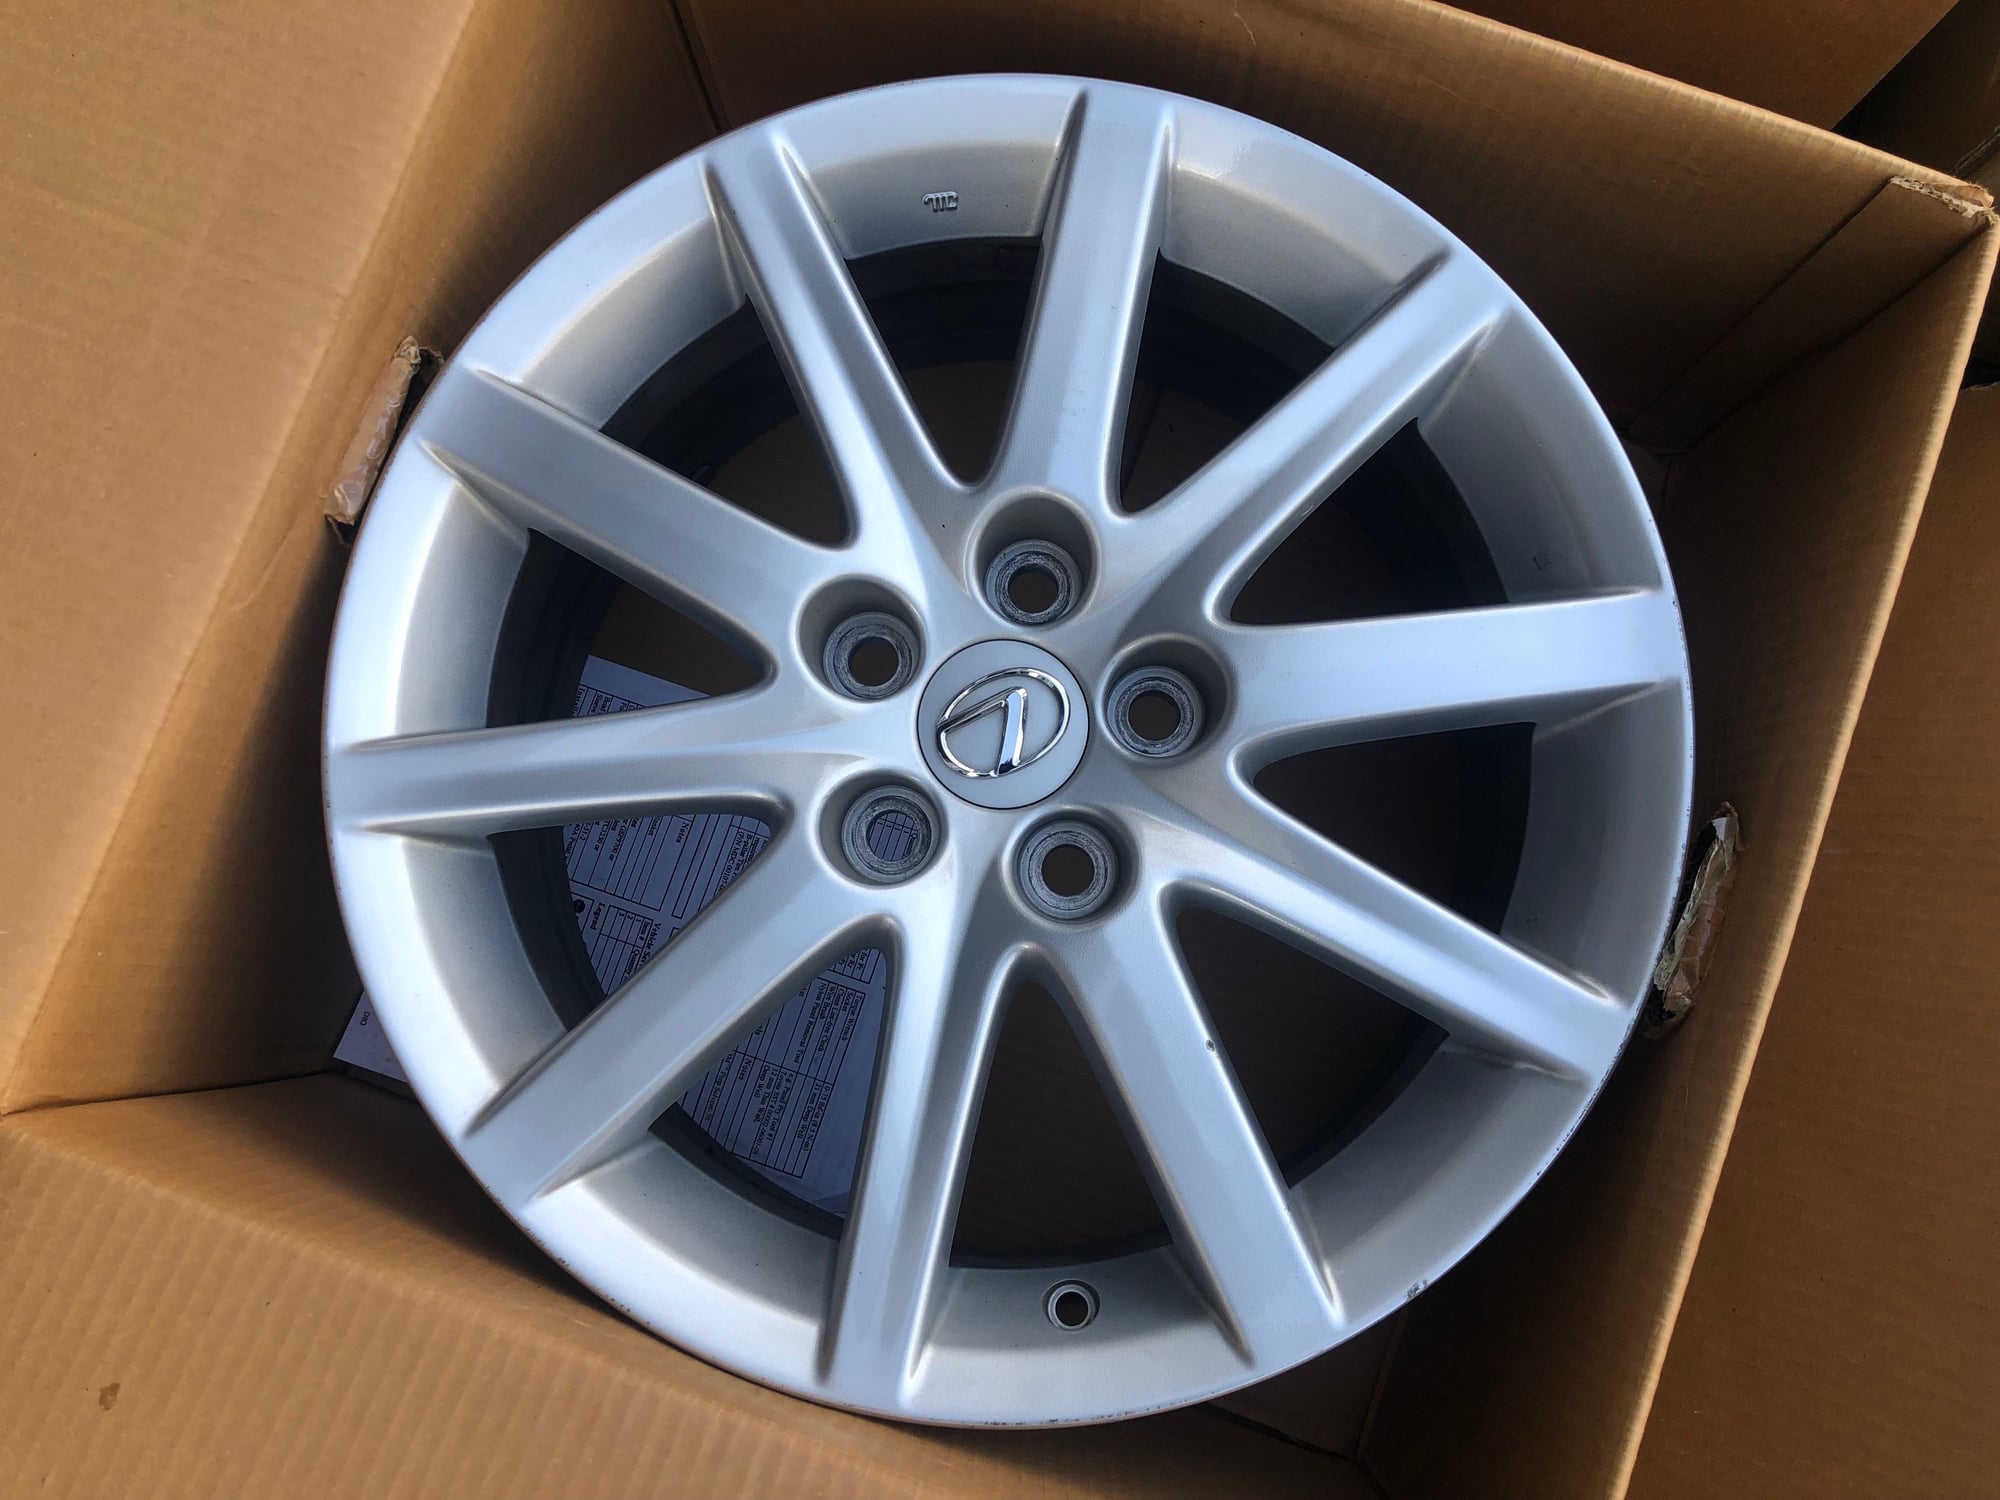 Wheels and Tires/Axles - FS: 2006 Lexus GS300 AWD Factory 17" Rims w/ Wheel Cover Caps - Used - 2006 to 2011 Lexus GS300 - Centreville, VA 20124, United States